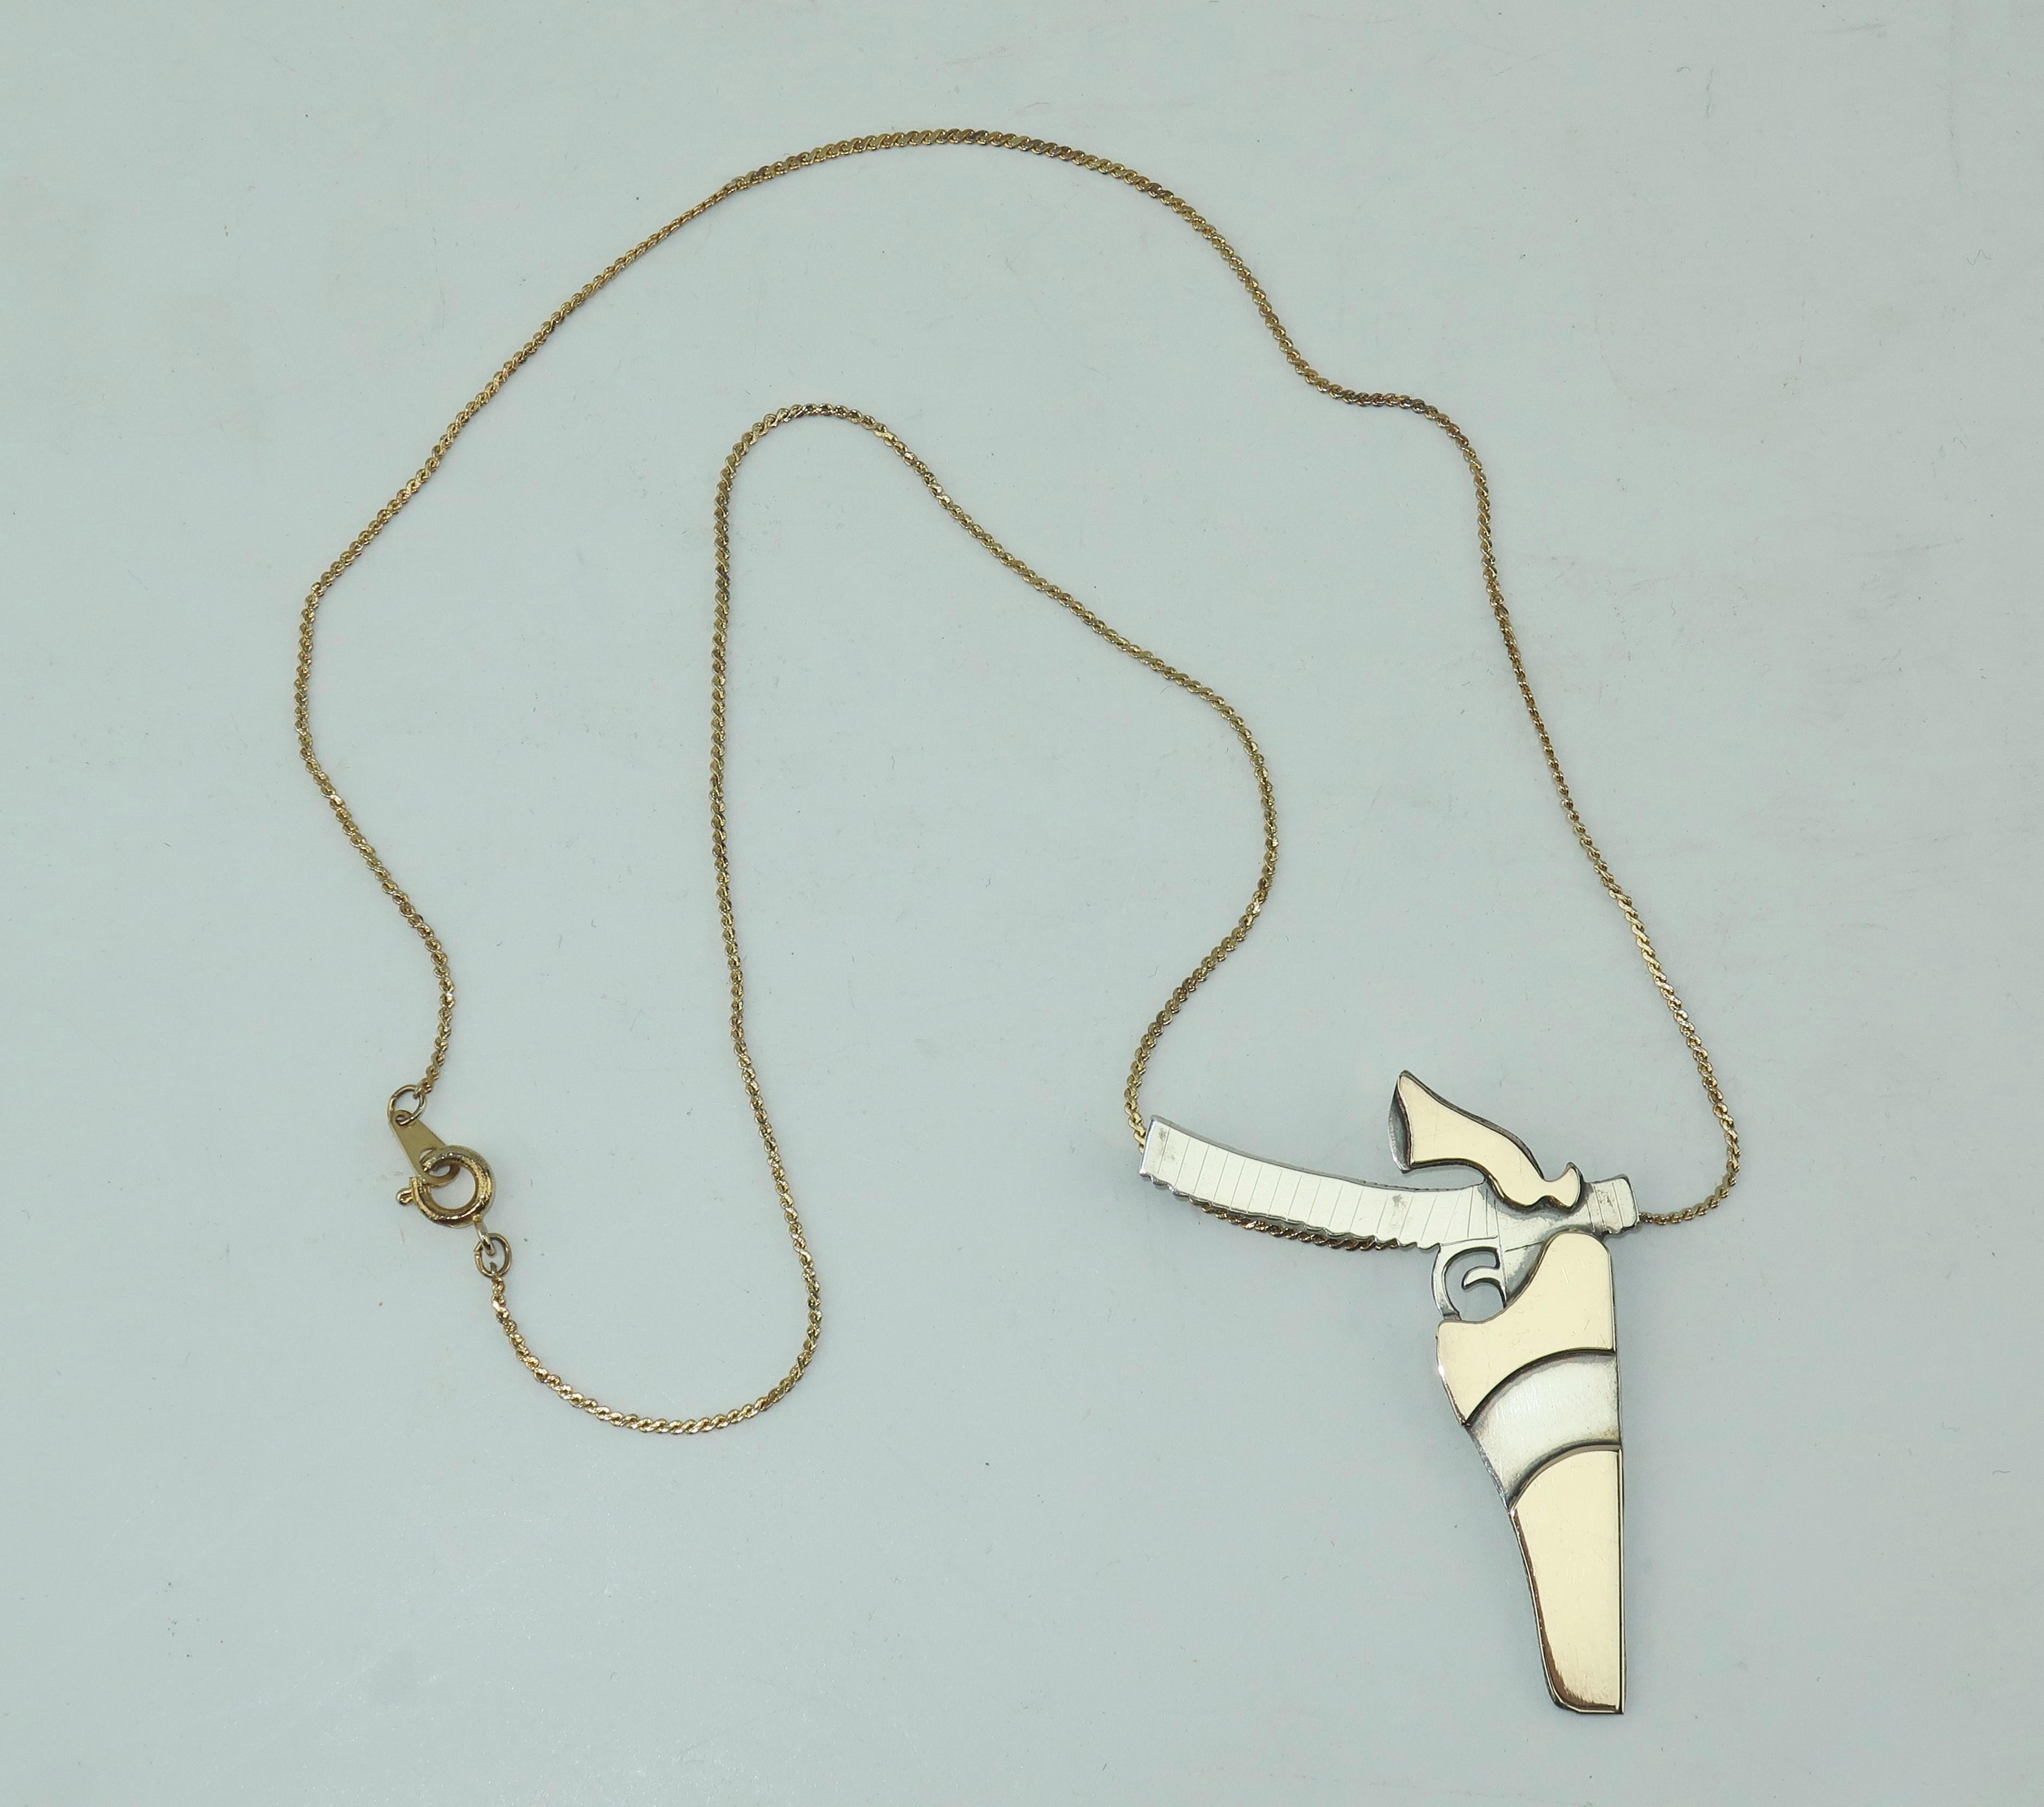 You don’t have to be a pistol packin’ mama to appreciate this modernist artisan sterling silver and brass gun pendant.  The graphic lines and minimalist details make this accessory a real conversation piece.  A natural paired with Western wear or a